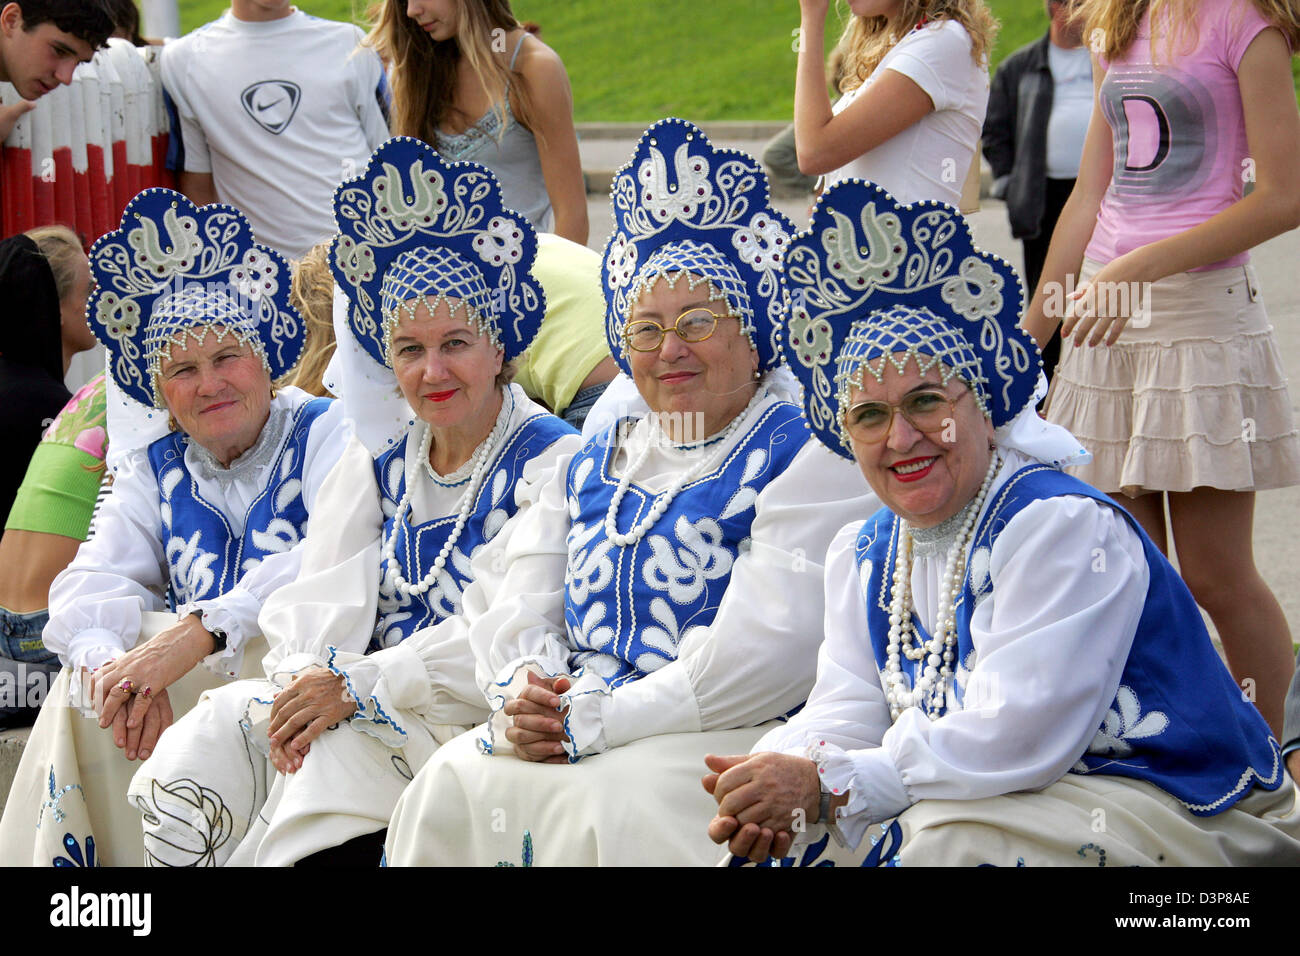 https://c8.alamy.com/comp/D3P8AE/russian-women-wear-traditional-clothes-at-the-festivities-to-the-417th-D3P8AE.jpg